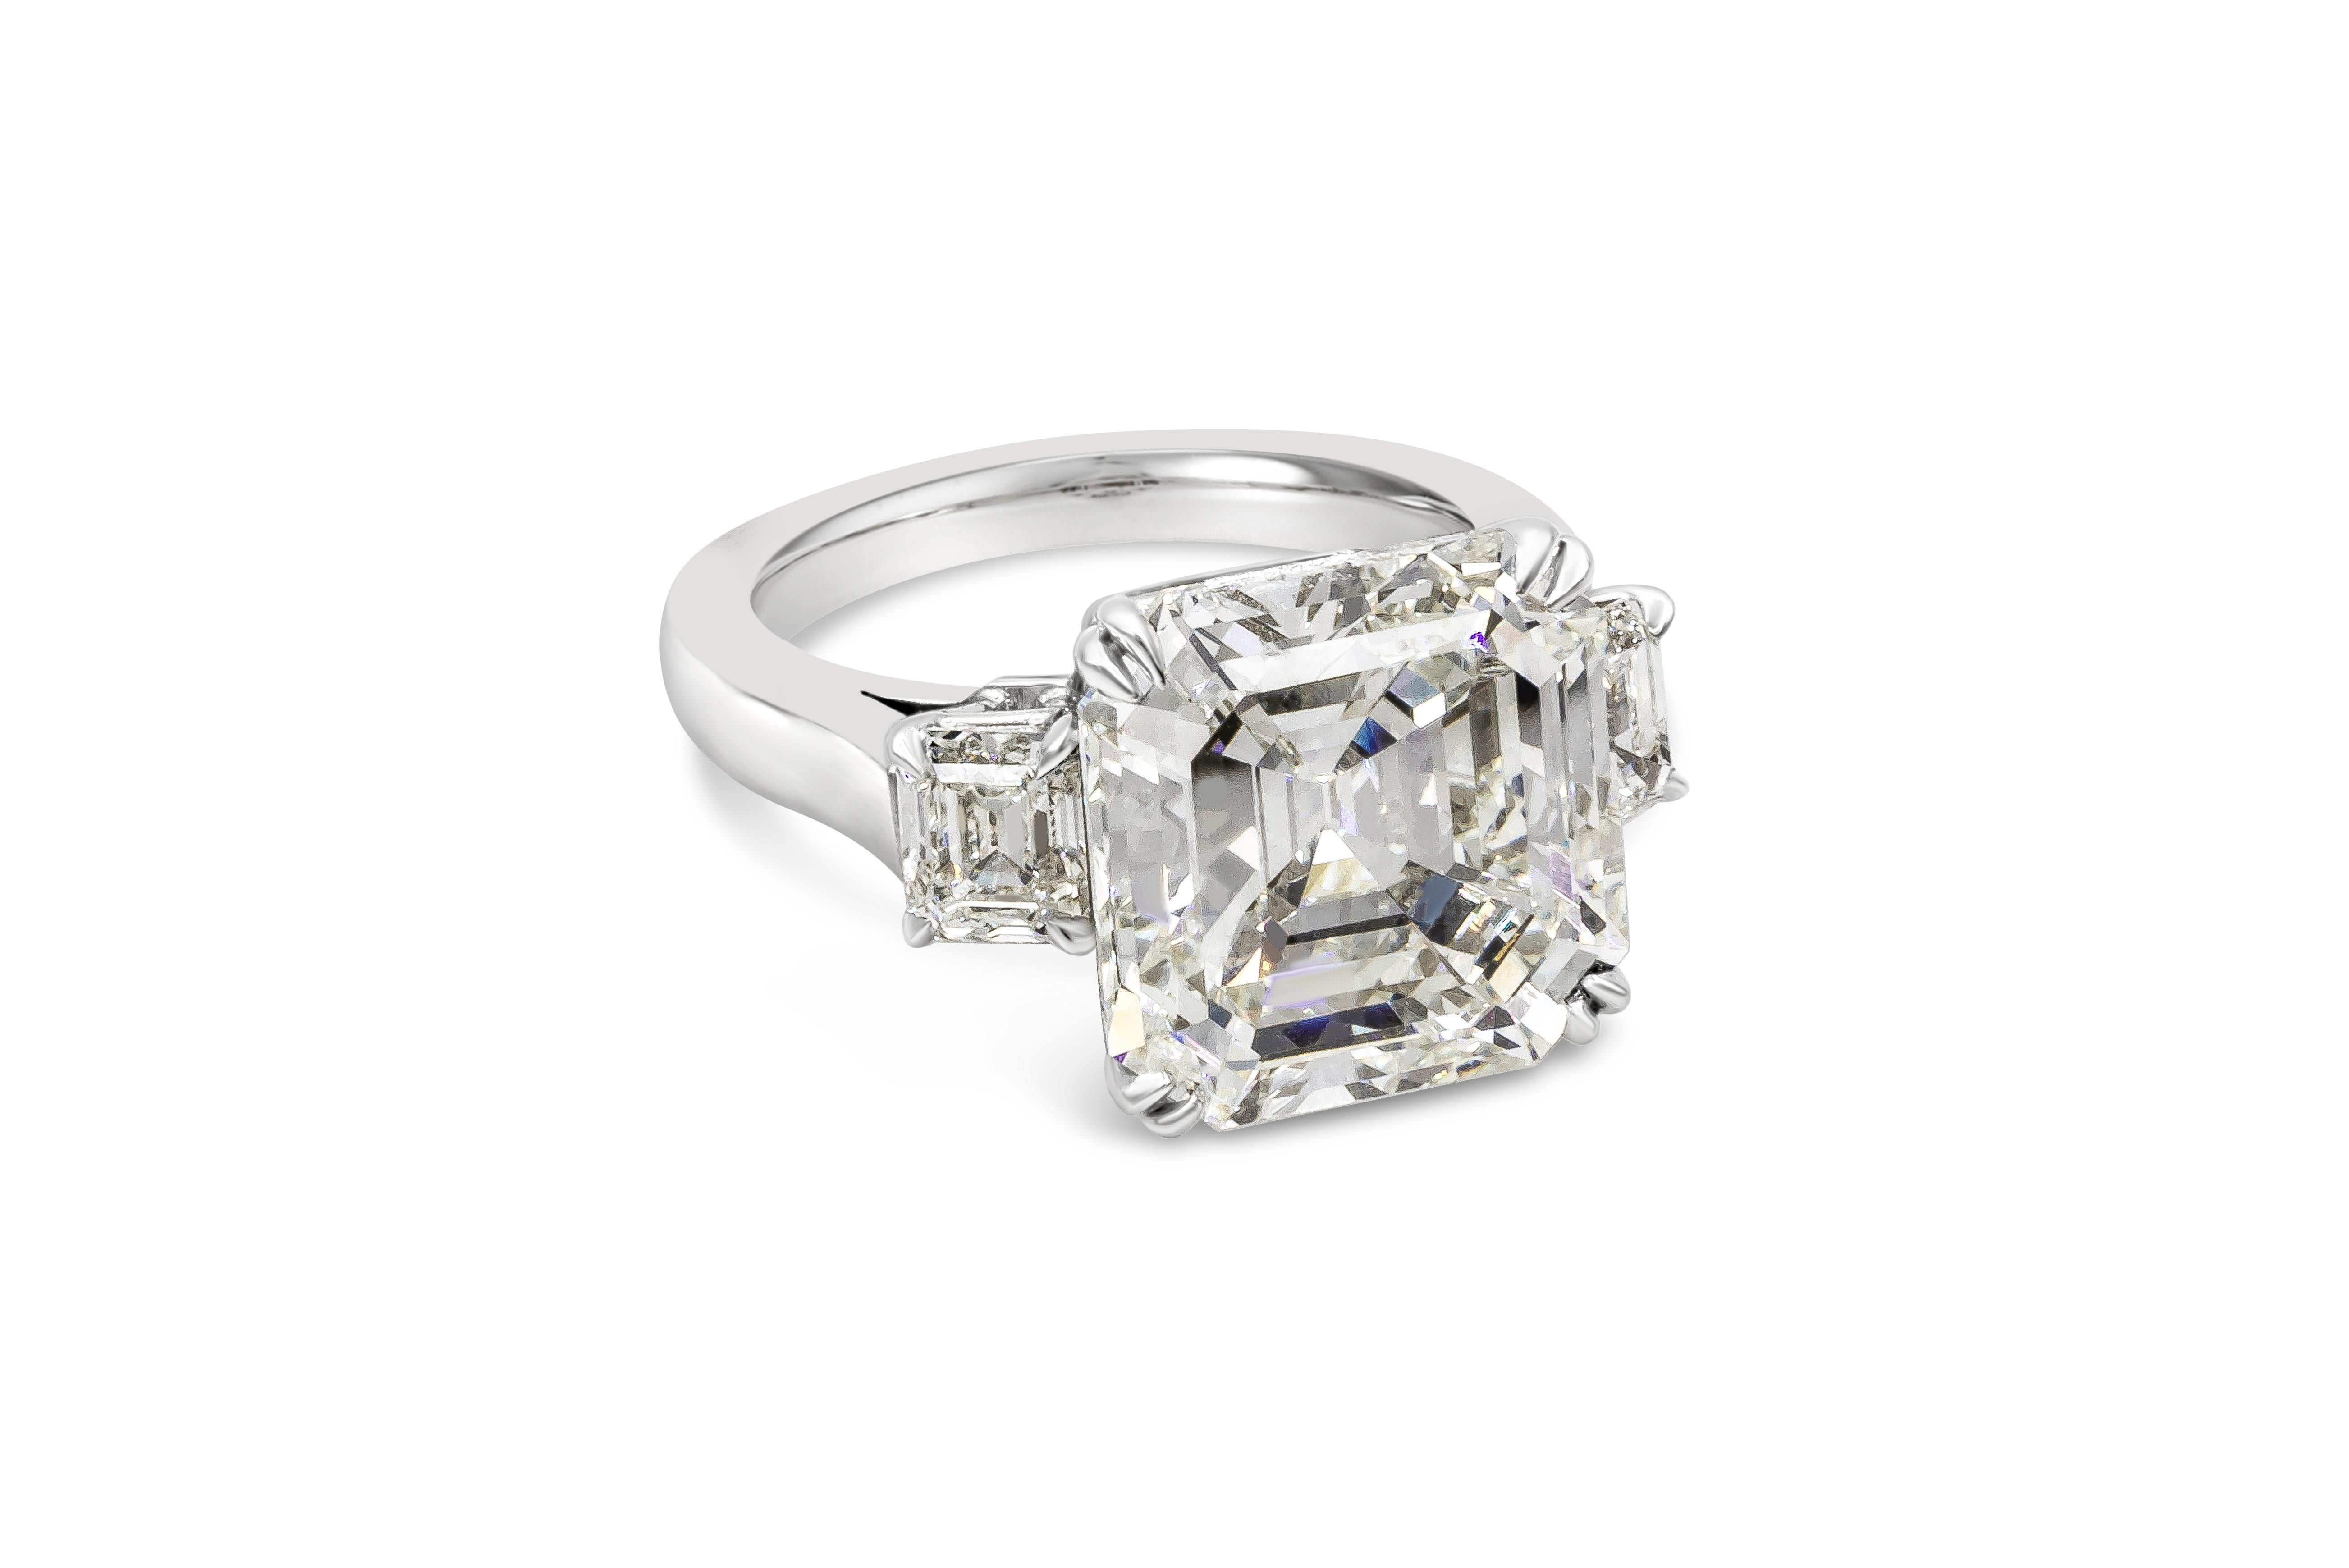 A subtle and sophisticated three stone engagement ring featuring a 9.20 carat asscher cut diamond certified by GIA as J color, VS2 clarity. Flanking the center diamond are 1.15 carats total of emerald cut diamonds set in a polished platinum